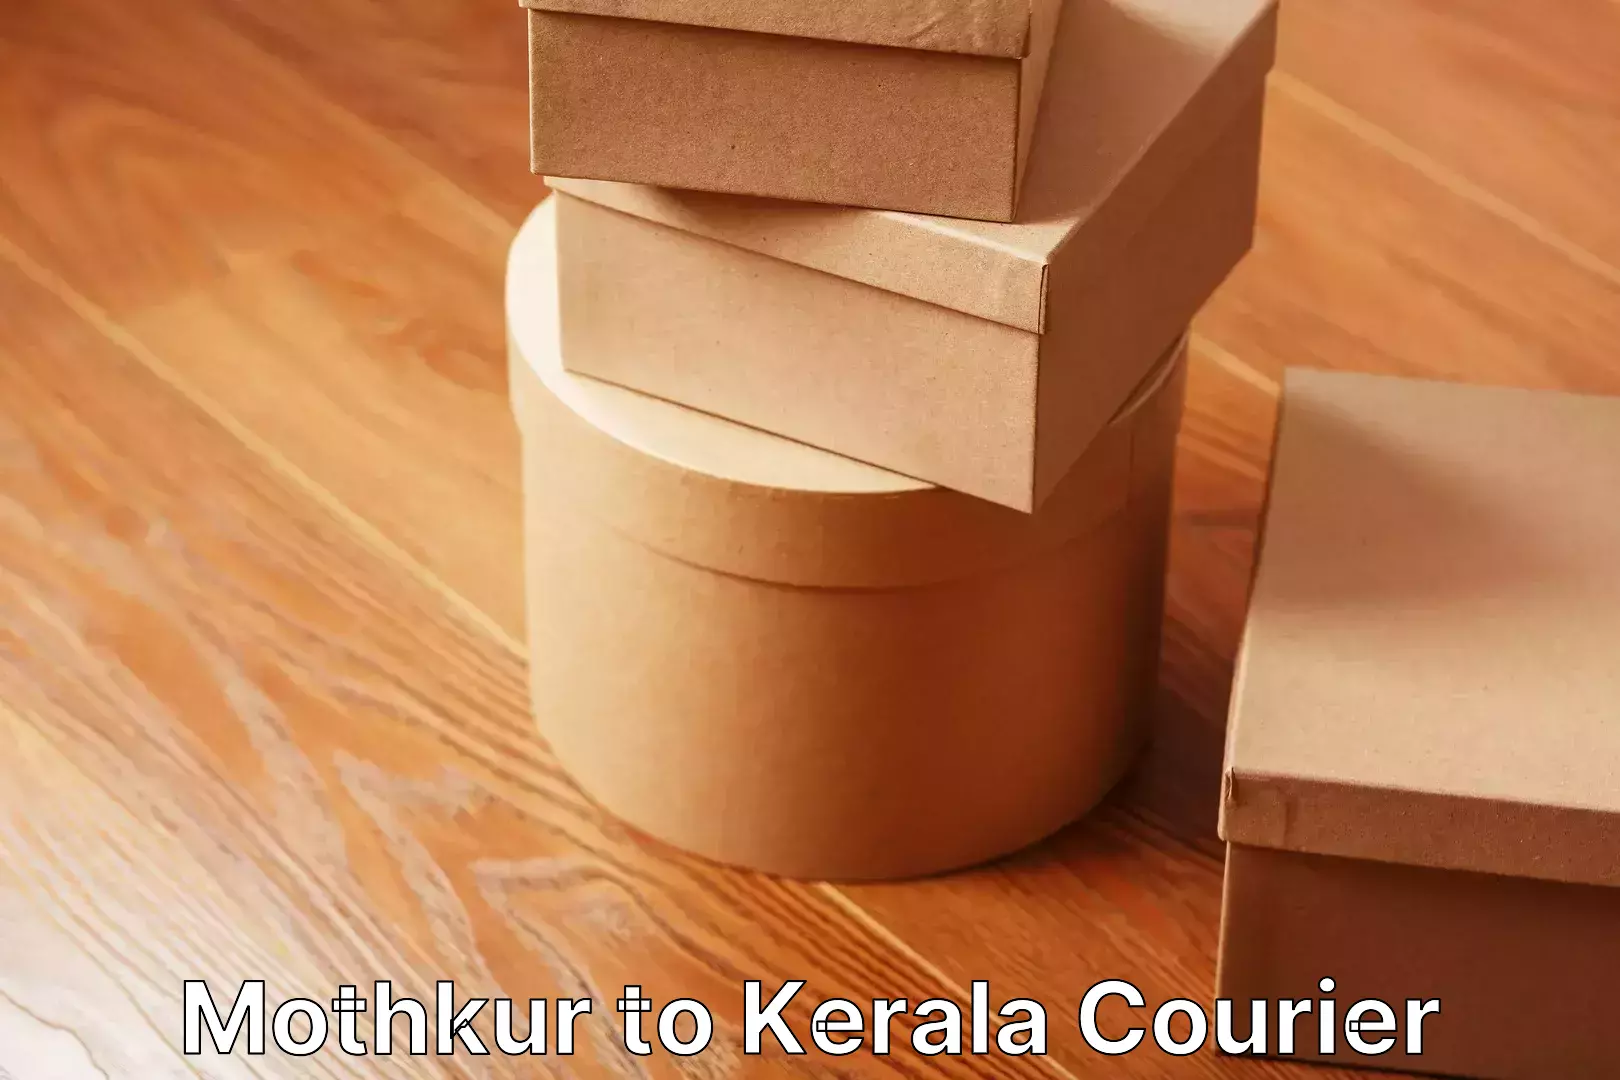 Furniture delivery service Mothkur to Kerala